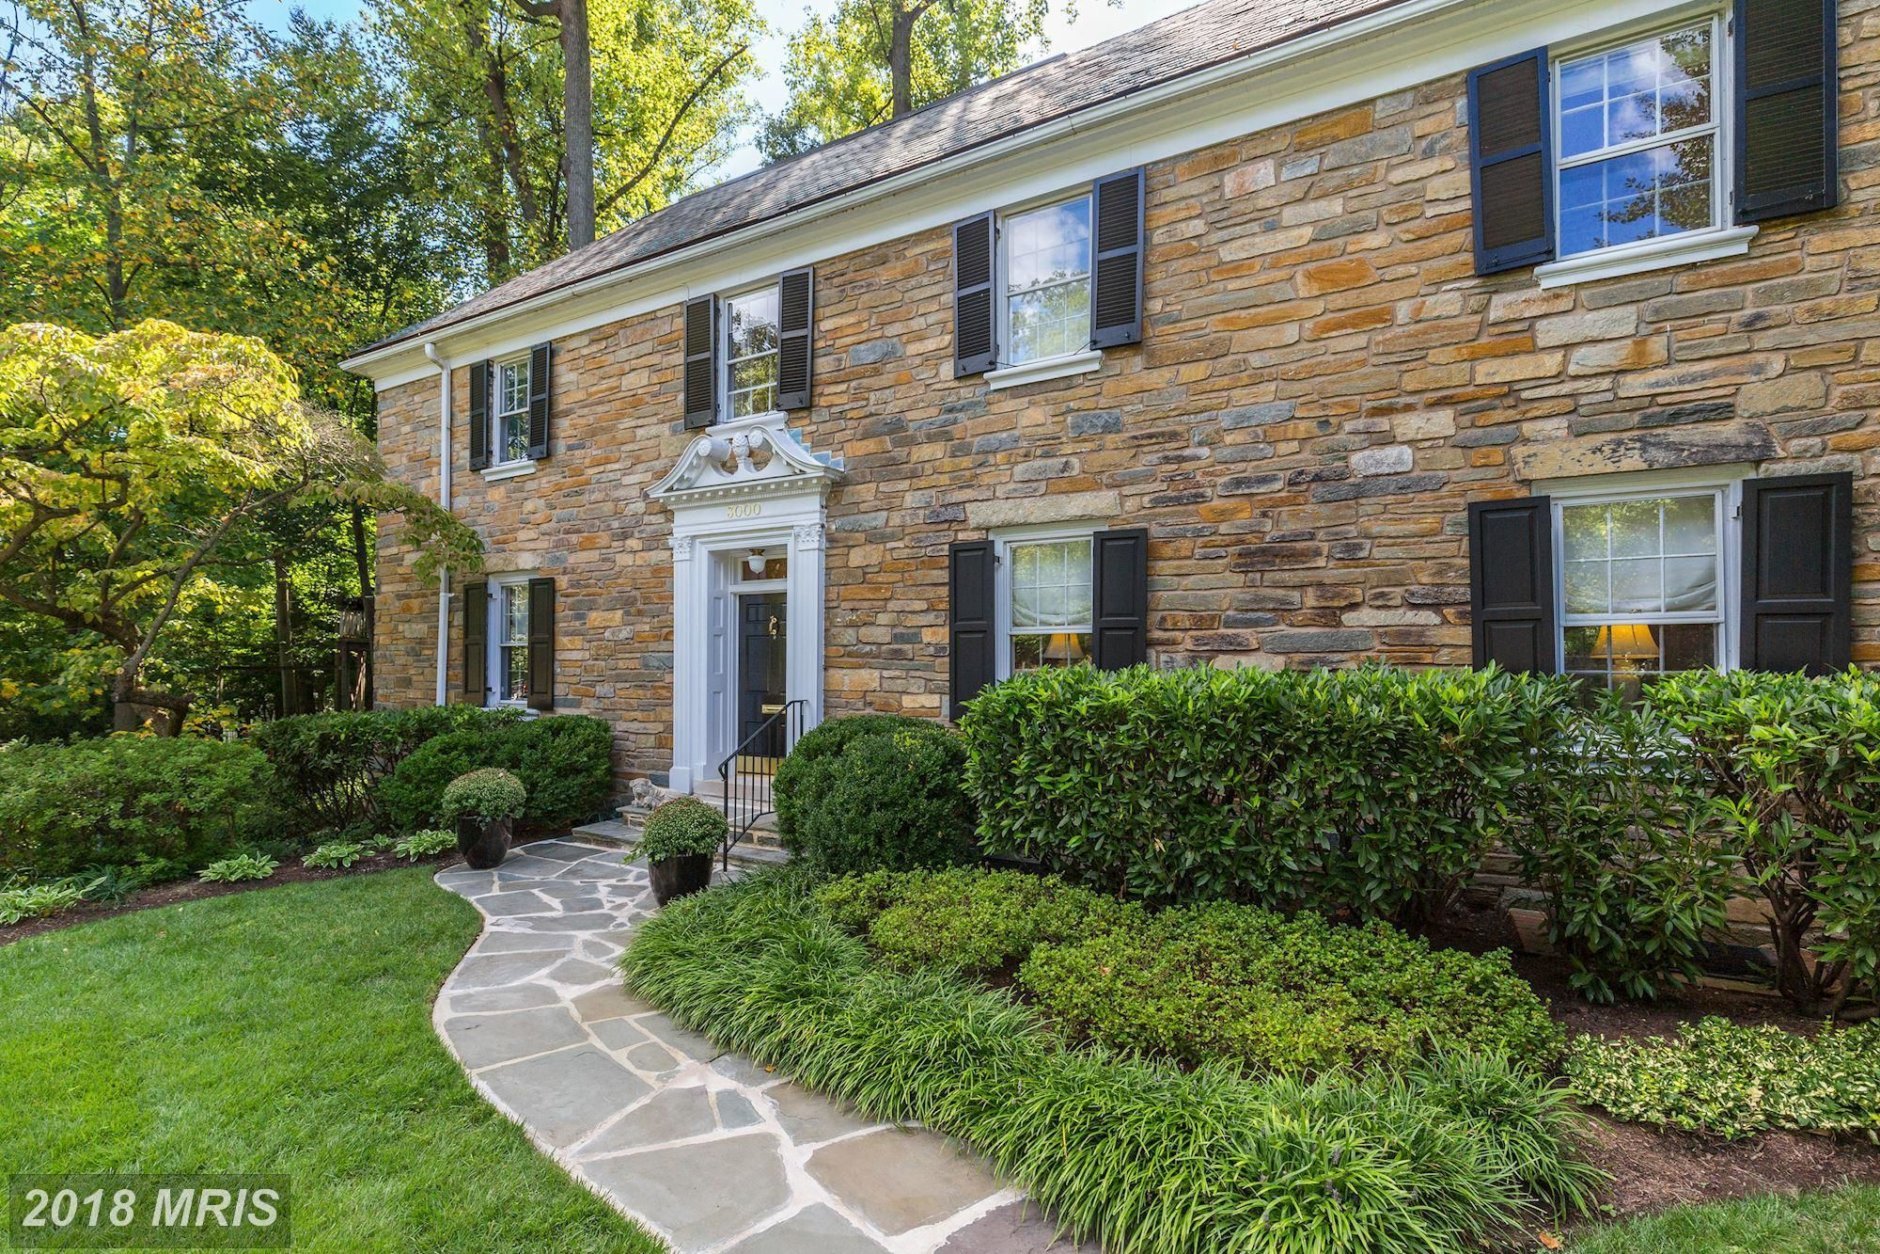 9. $2,550,000

3000 Woodland Drive NW 
Washington, D.C. 

This six-bedroom colonial style home was built in 1927. 

(Courtesy Bright MLS) 